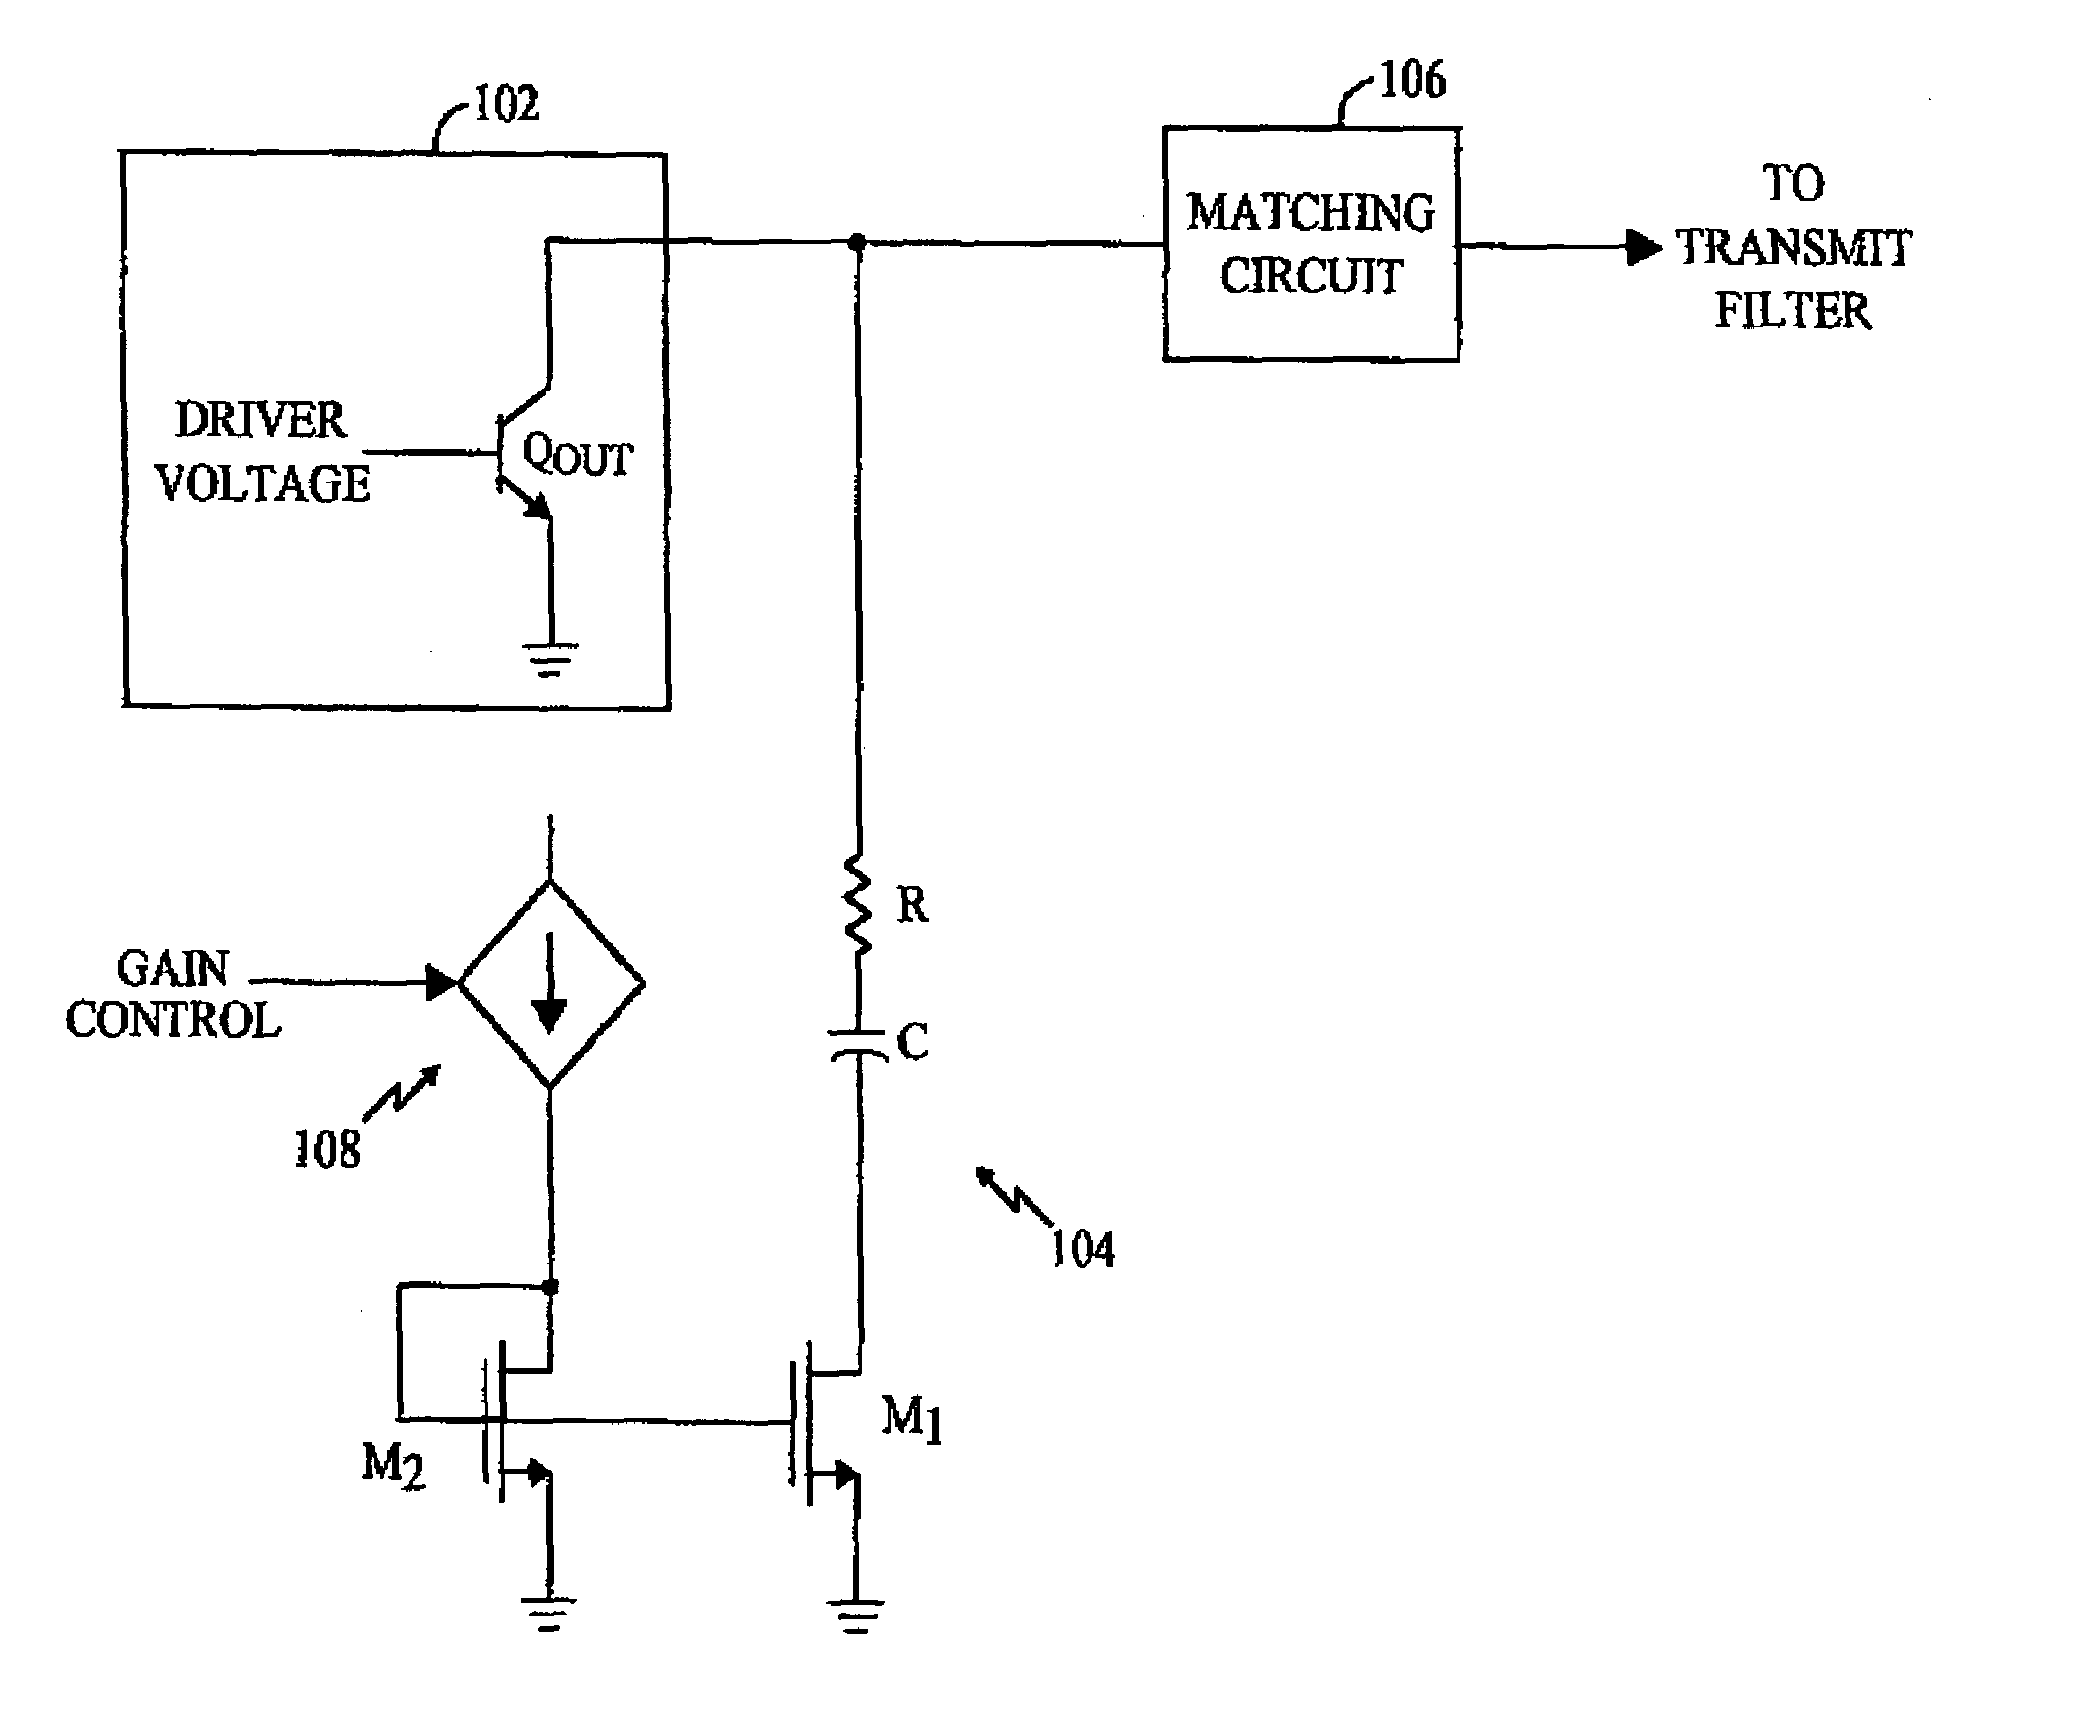 Variable impedance load for a variable gain radio frequency amplifier